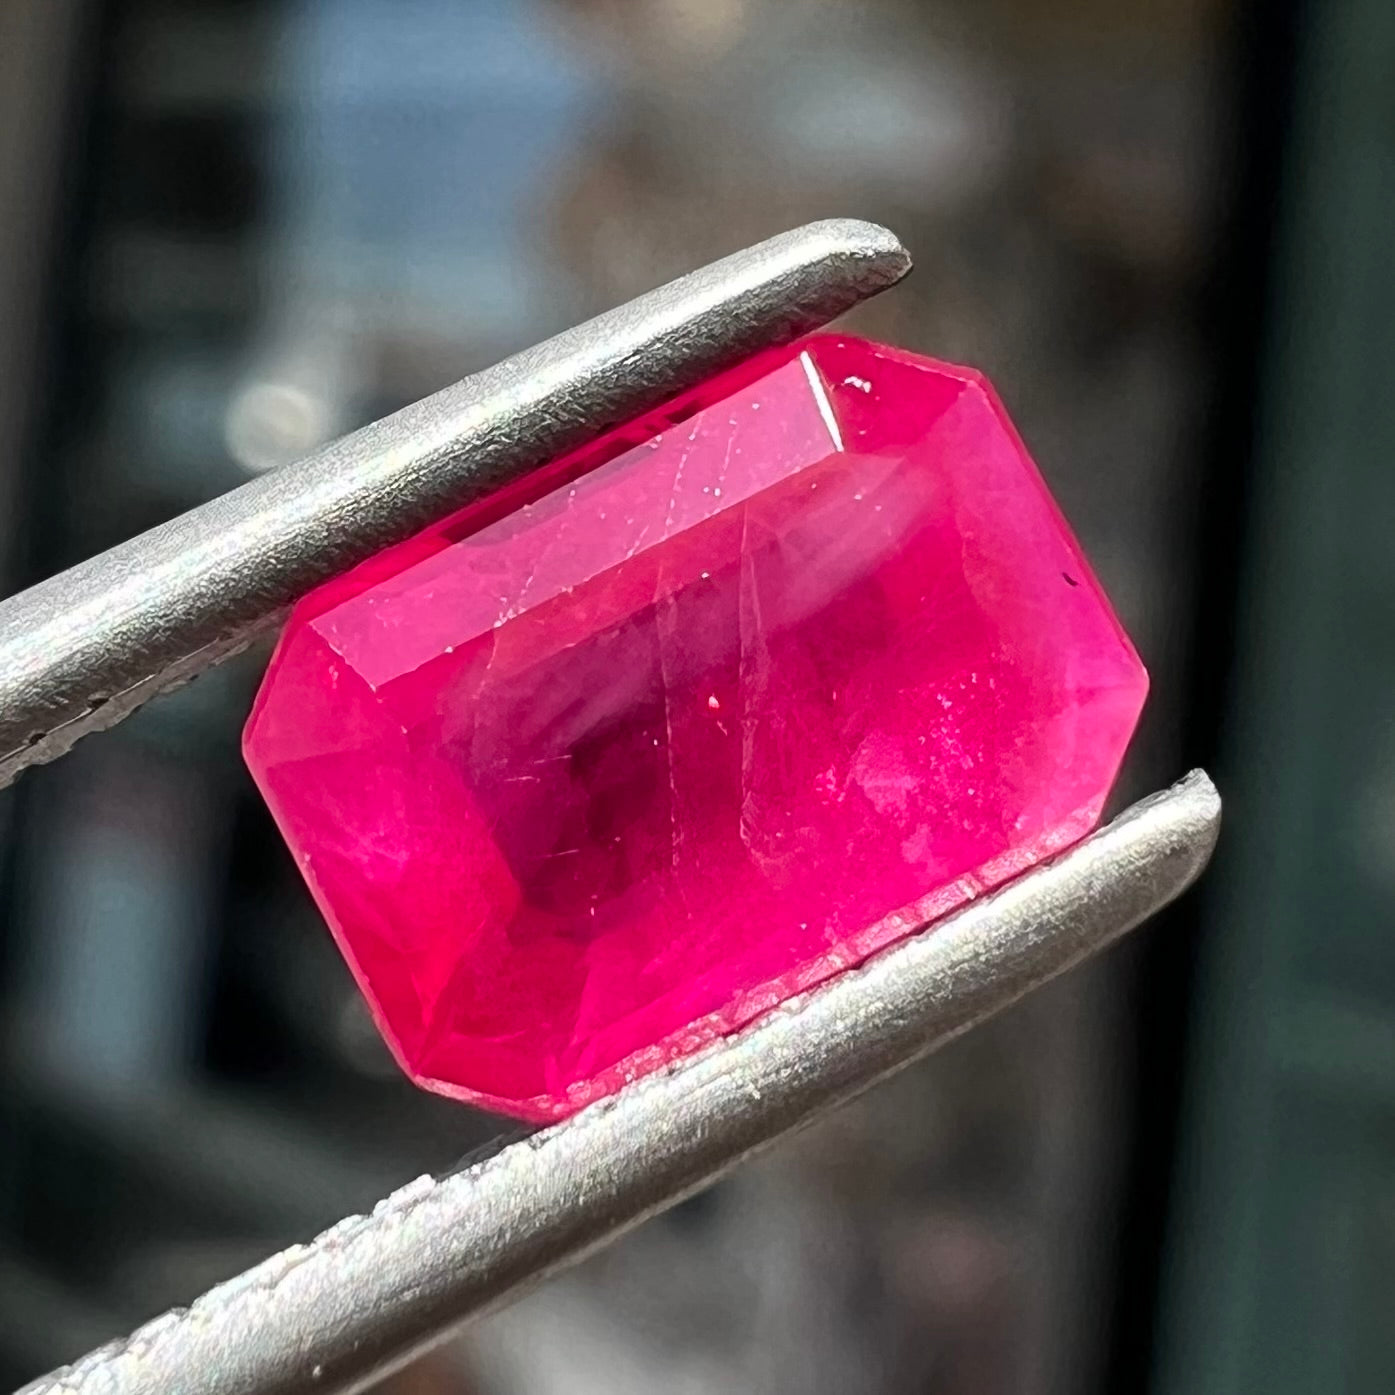 A natural, emerald cut Burma ruby gemstone.  The stone is pinkish red color.